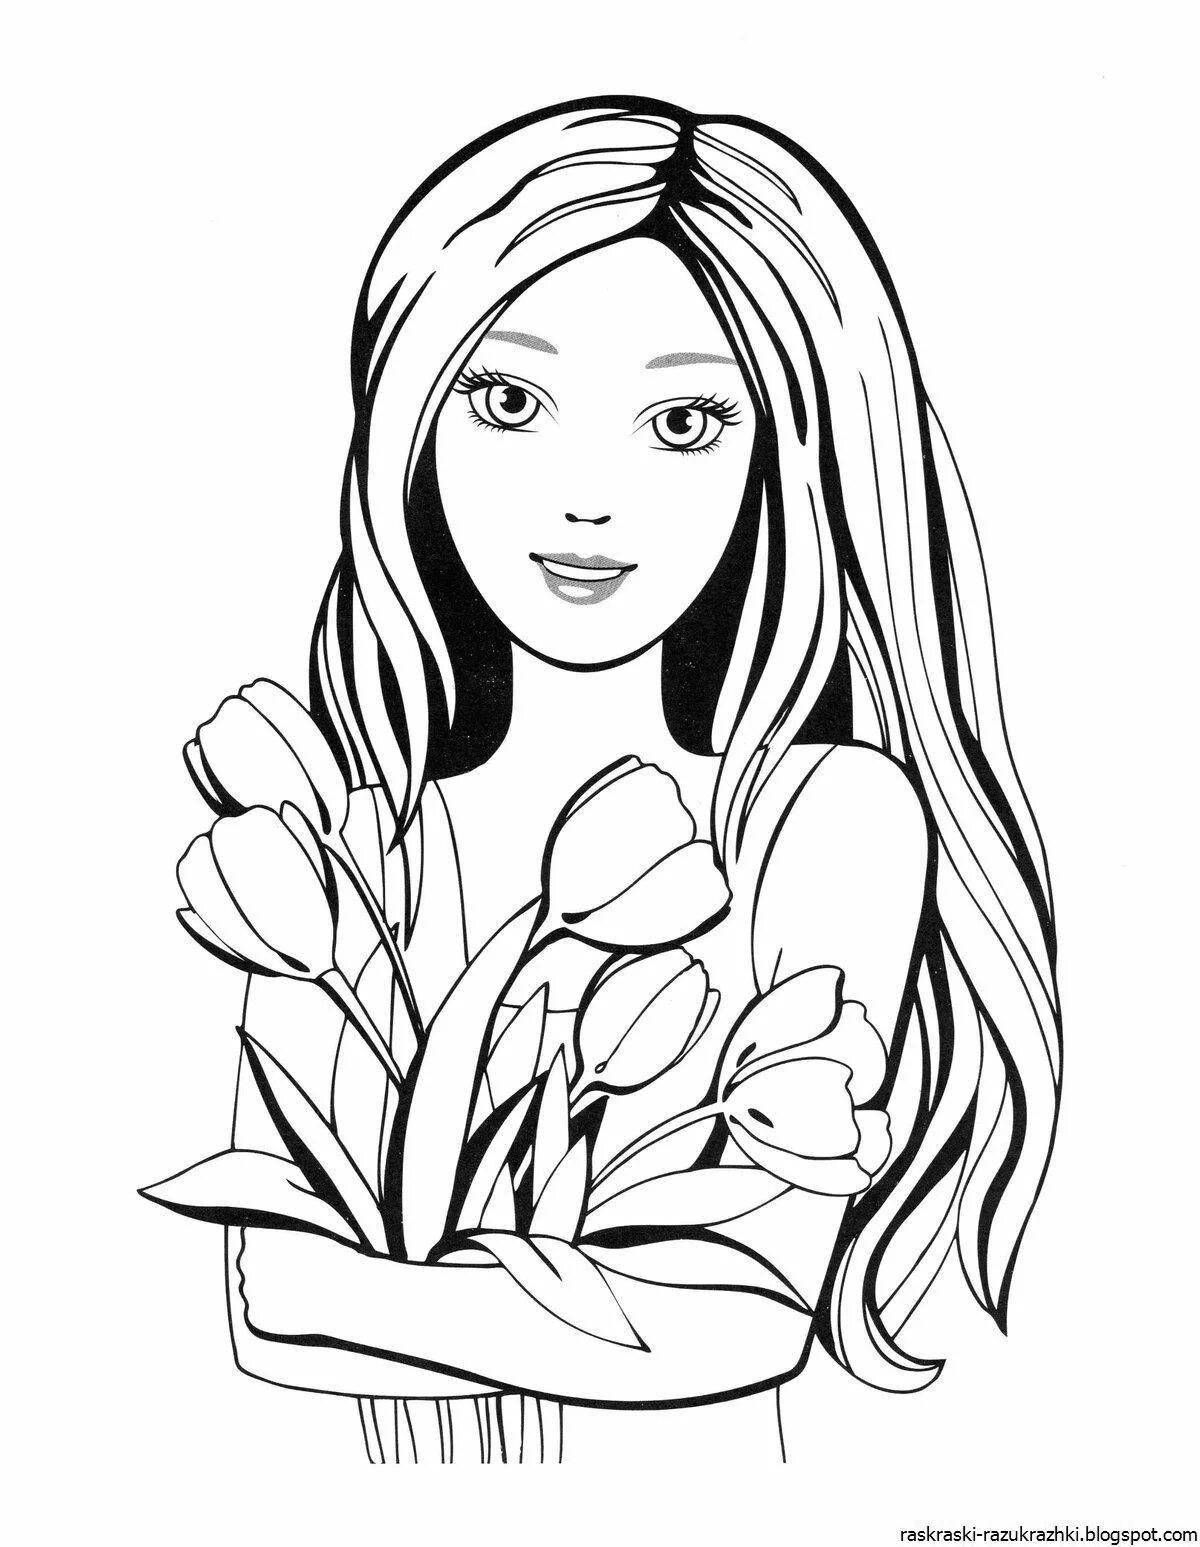 Fun coloring book for girls 9-8 years old